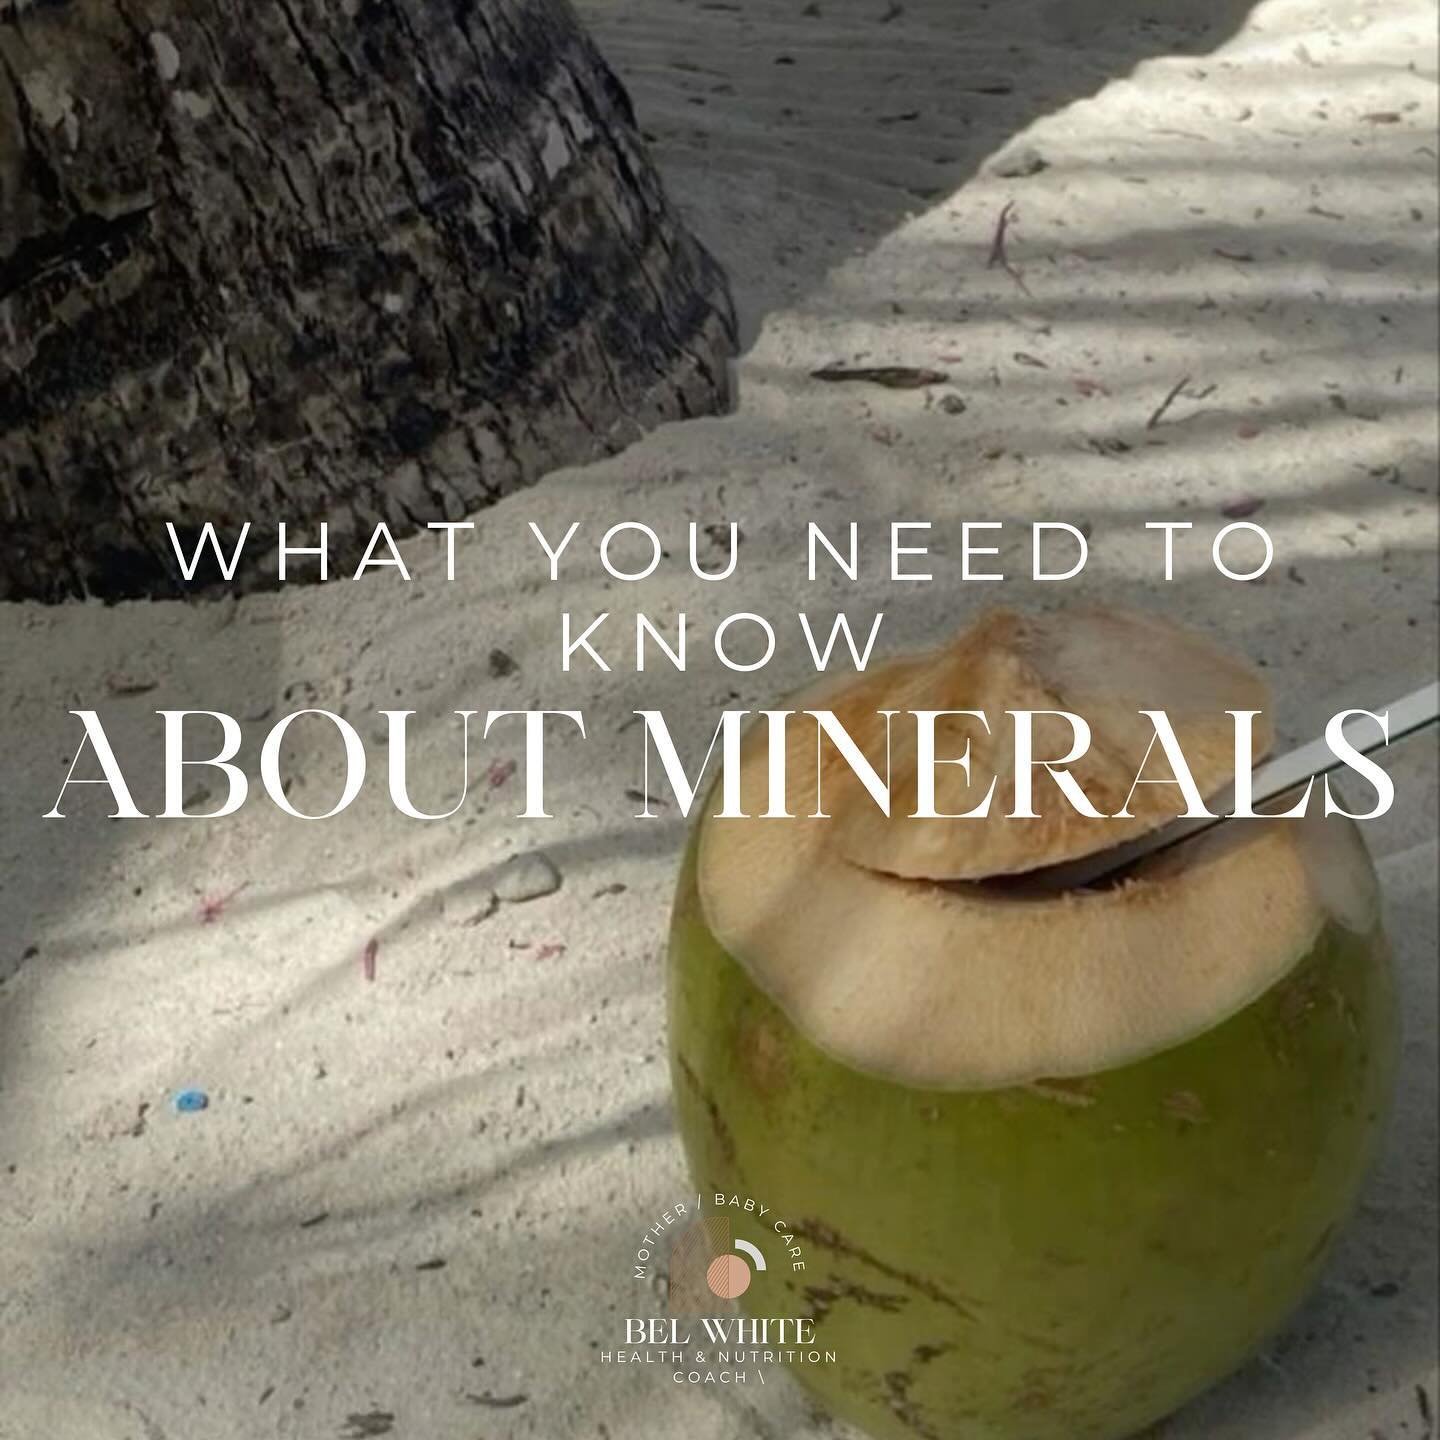 Minerals play a crucial role in maintaining your overall health as they act as essential fuel sources for every cell in your body.
✨
My advice when starting out with minerals, focusing on your electrolyte balance and the top three macrominerals:

🥥P